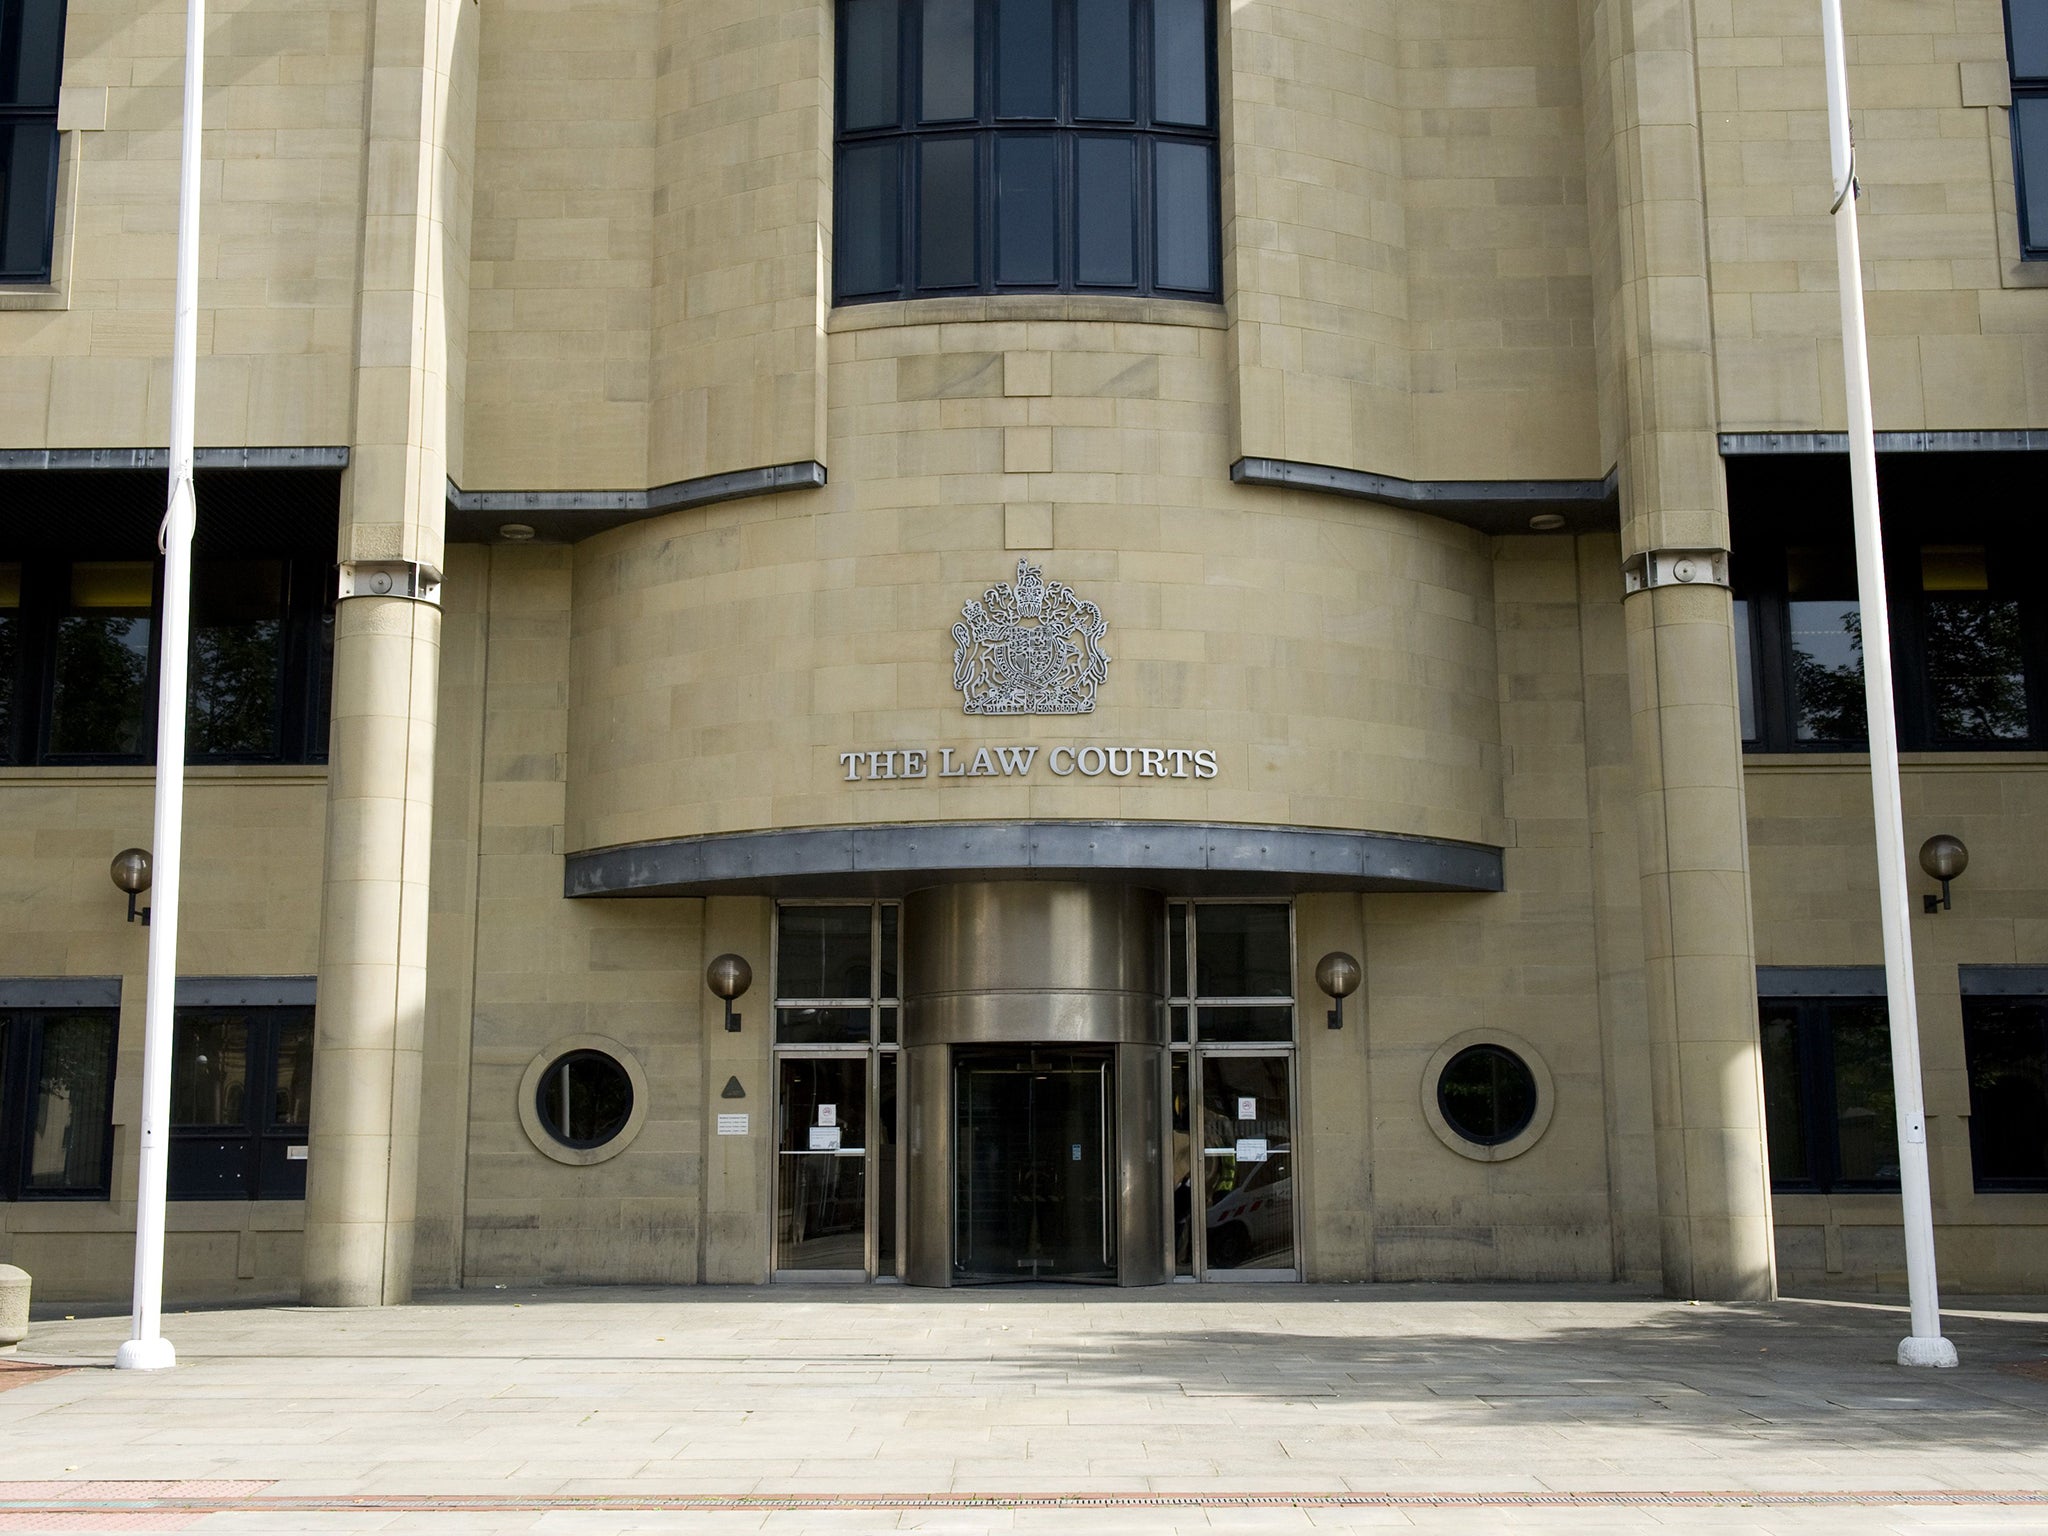 The gang were sentenced at Bradford Crown Court